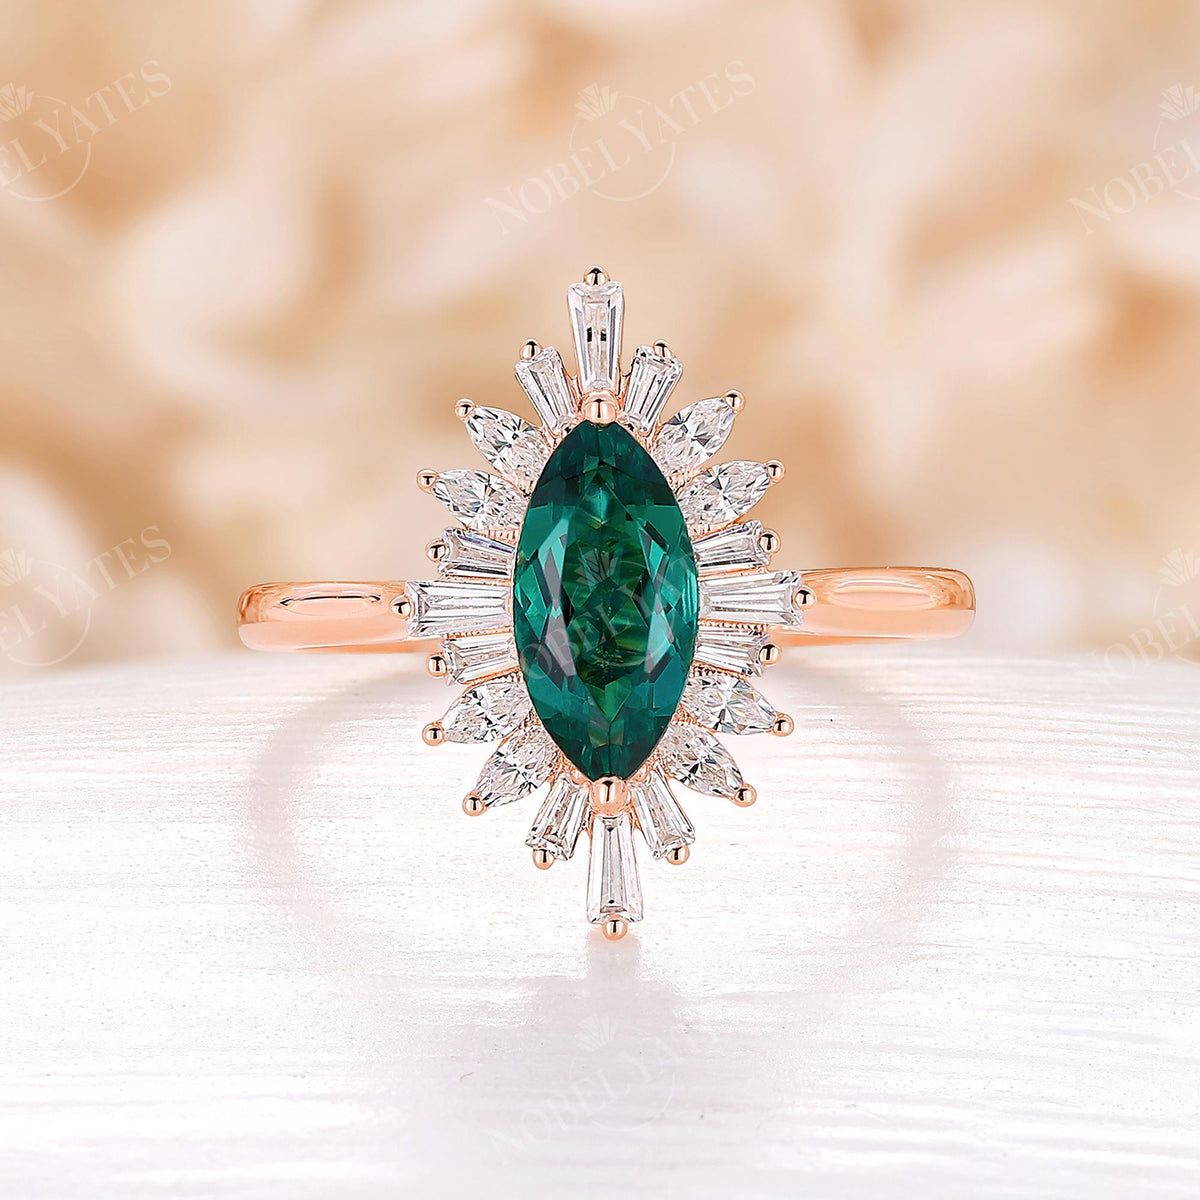 Art deco Marquise Lab Emerald Halo Engagement Ring Rose Gold